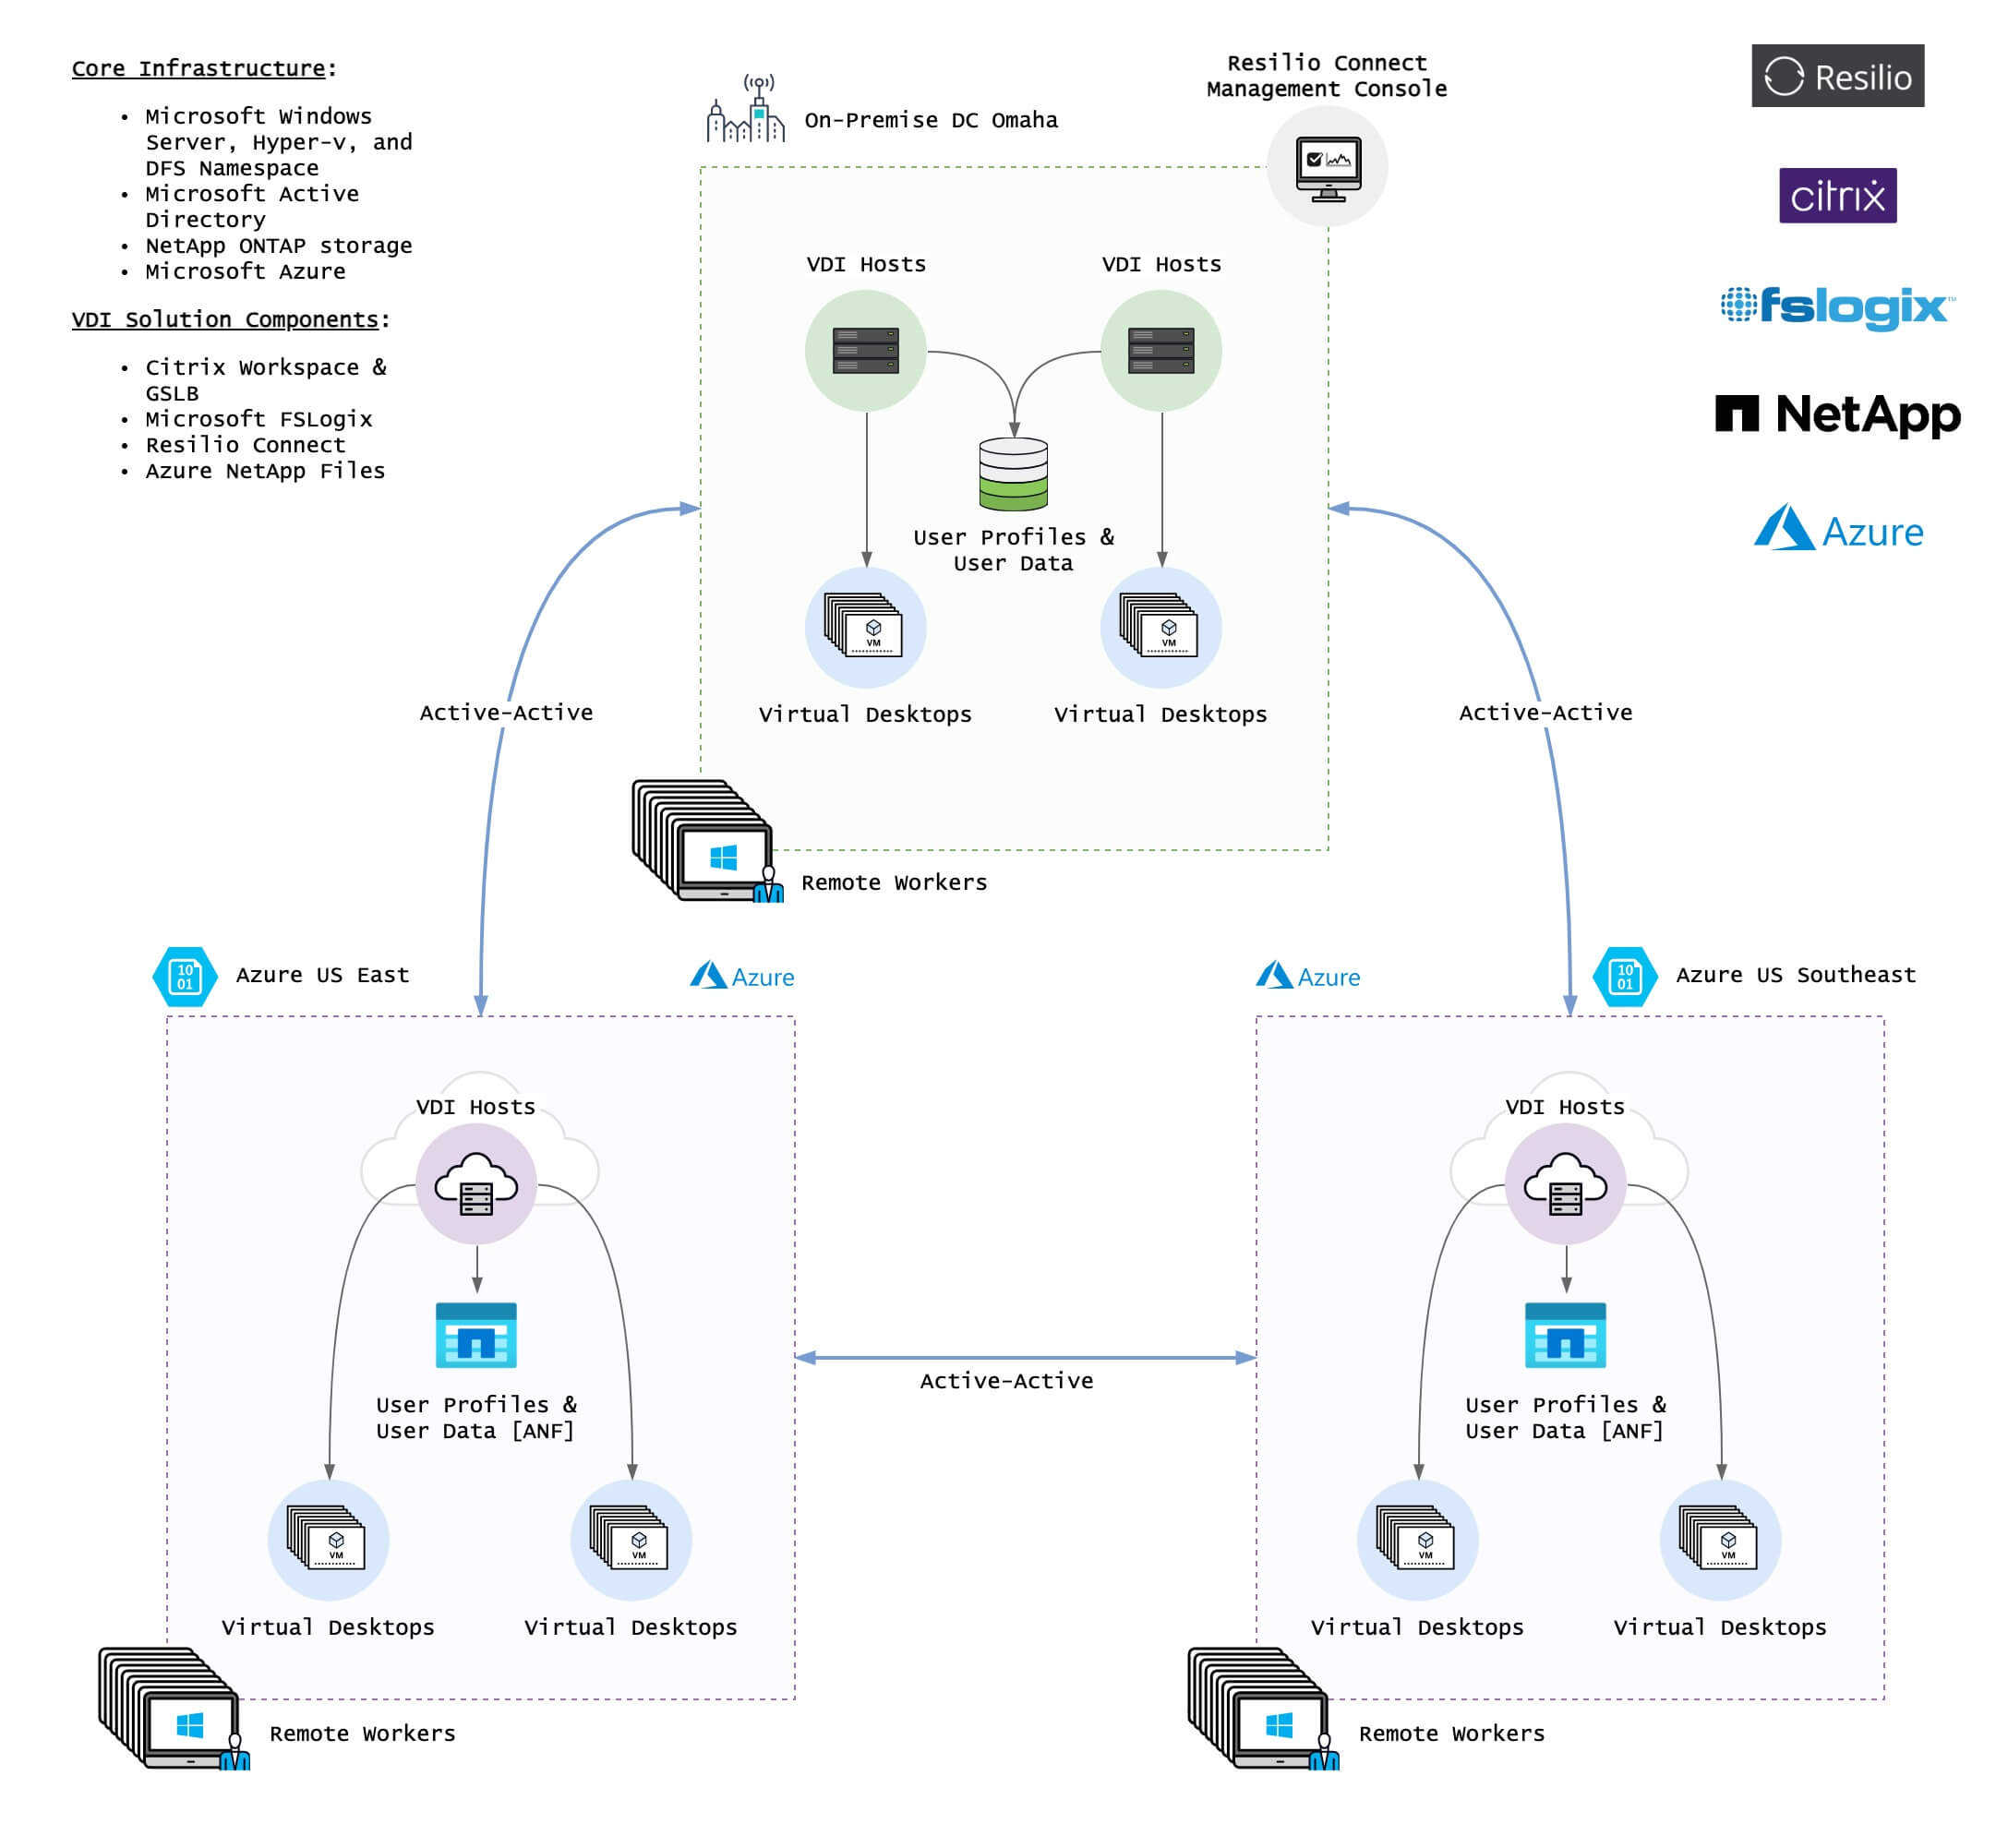 Resilio Connect: Solution Architecture for High-Performance VDI Profile Sync using Azure NetApp Files